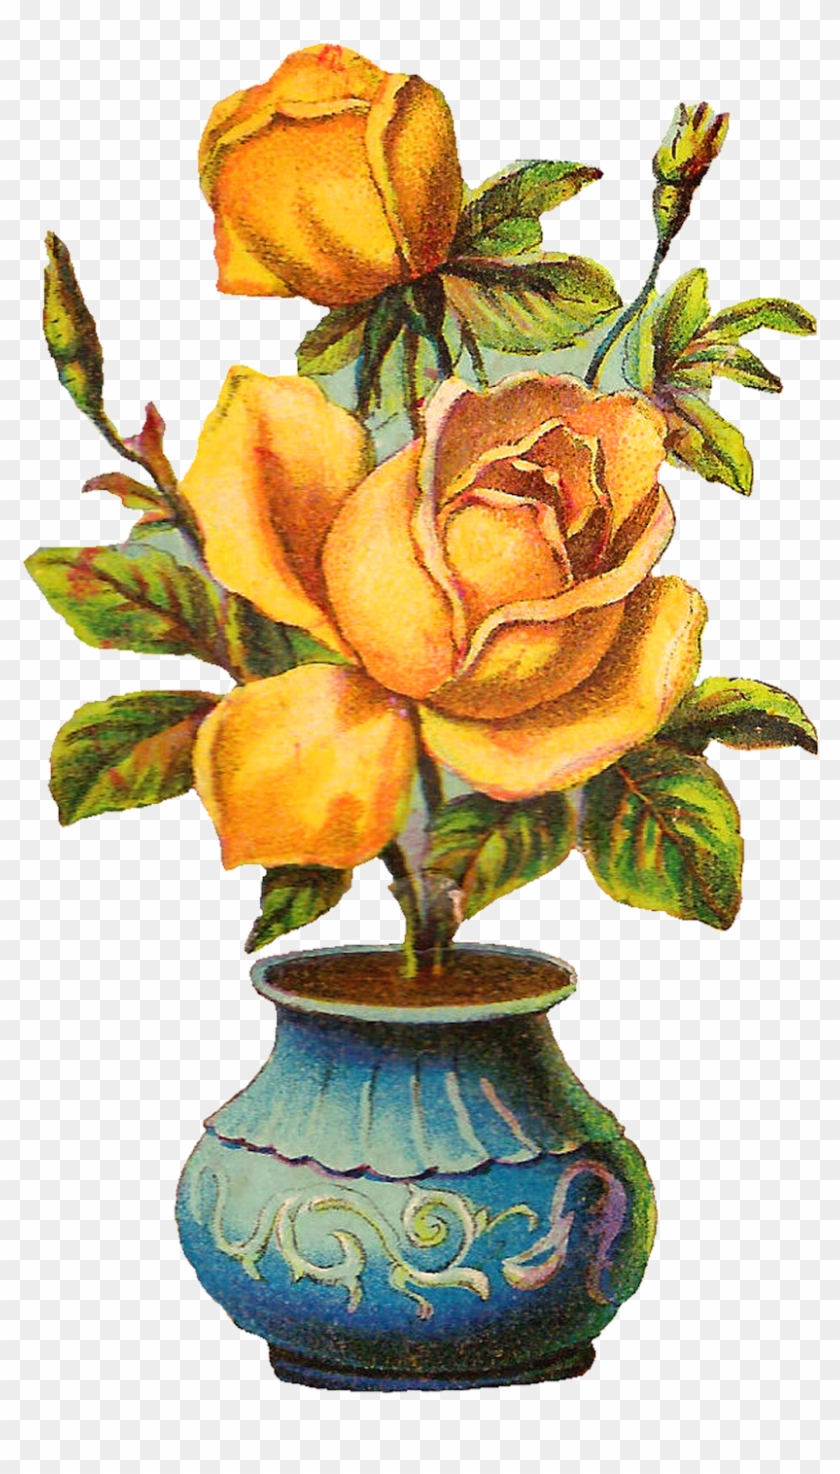 Yellow Roses Are My Favorite Flower I Created This - Rose Flower Hd Pot Clipart